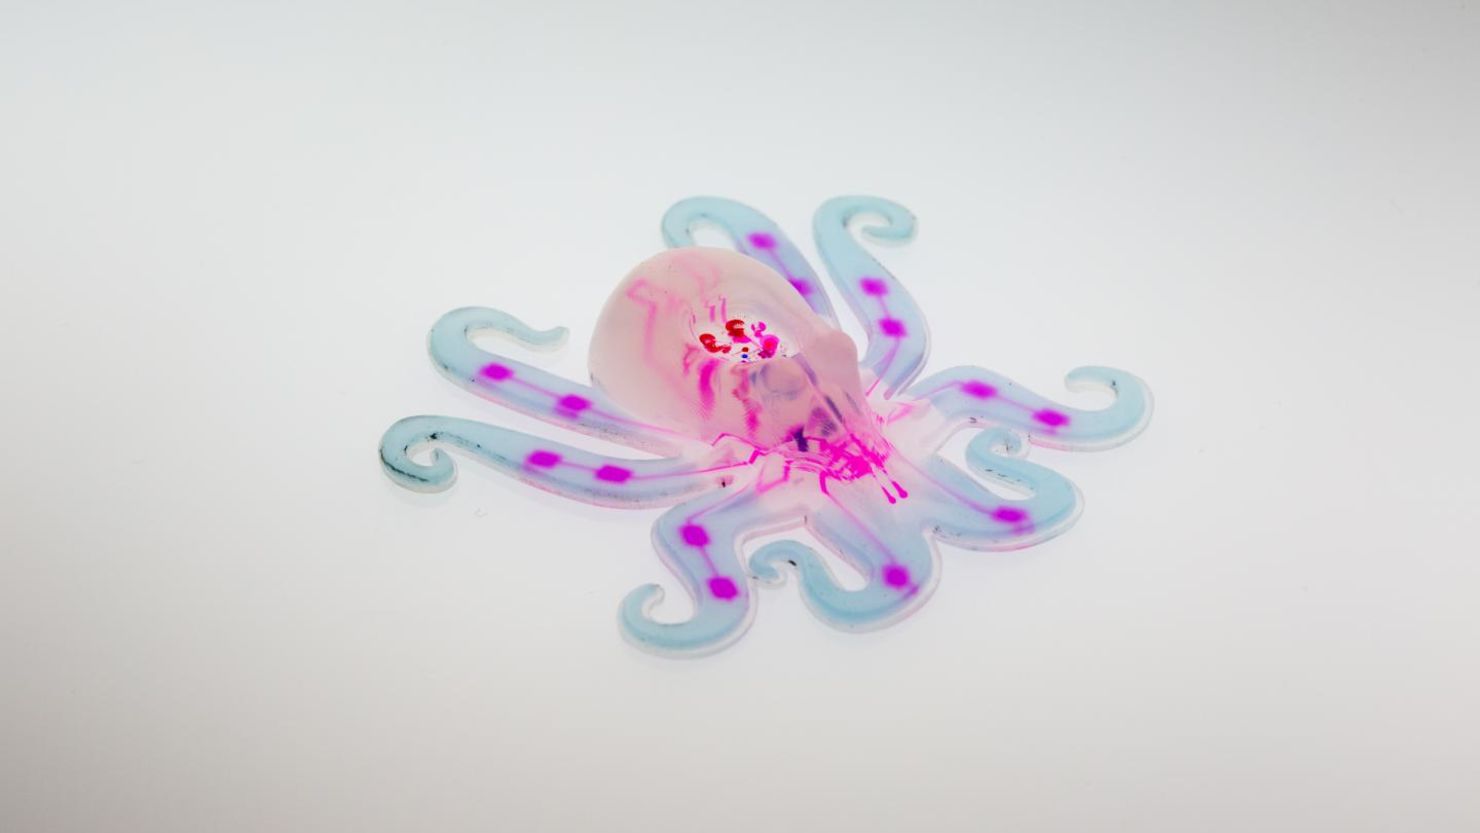 Octobot is an autonomous soft robot powered entirely by a chemical reaction